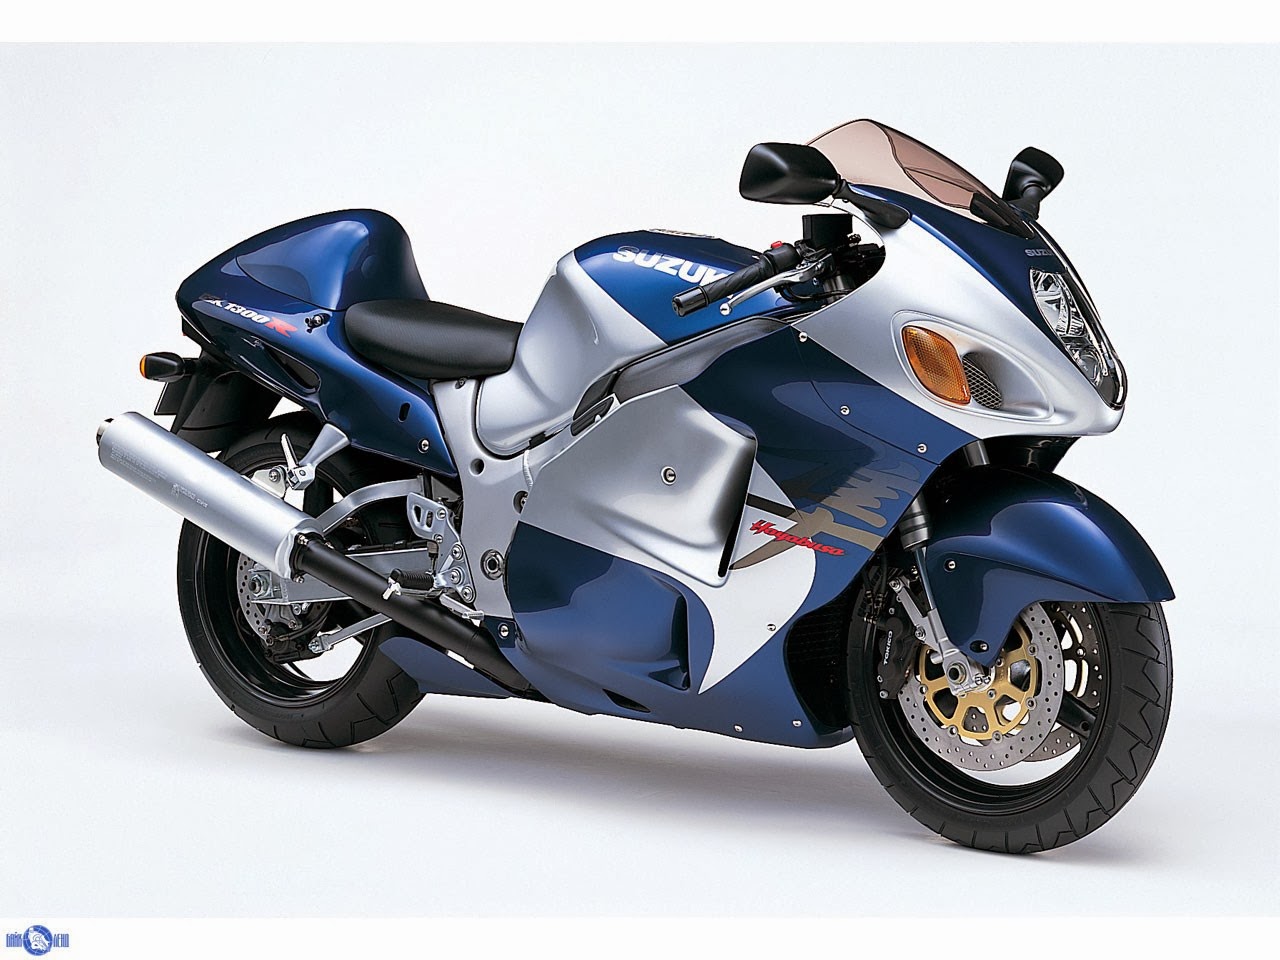 Suzuki Hayabusa Pictures HD Quality With Exterior And